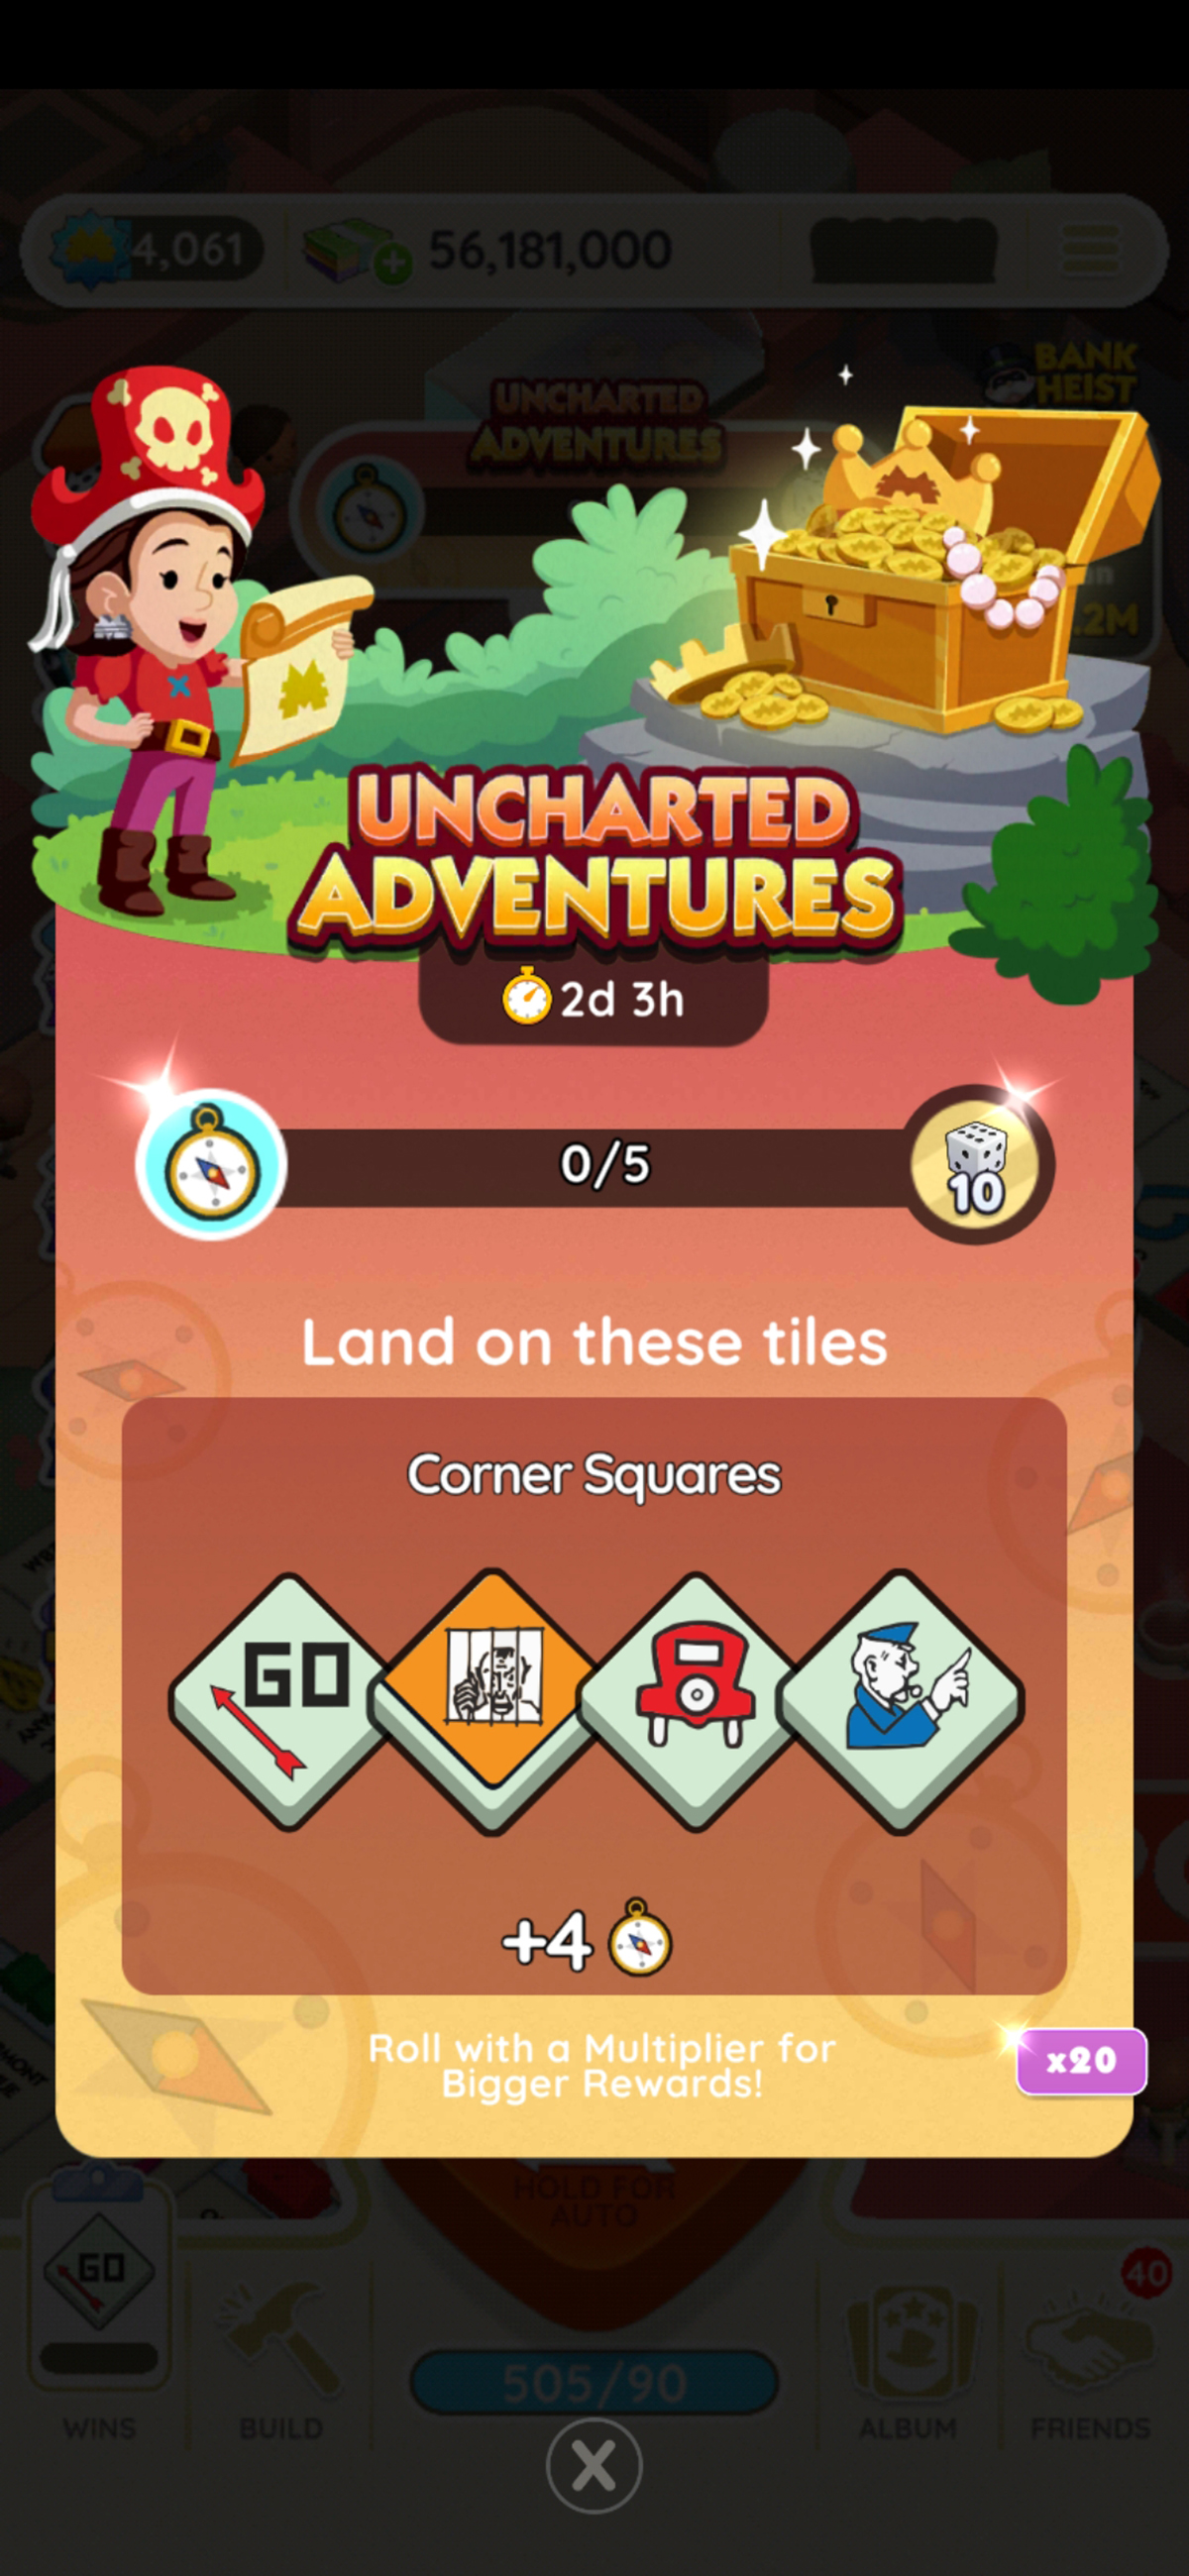 A header-sized image for the Uncharted Adventures event in Monopoly GO showing a woman reading a map on the right-side of the image while there's a treasure chest on the right-side. The image is part of a list article on all the prizes, rewards, milestones list for the Uncharted Adventures event in Monopoly GO. 